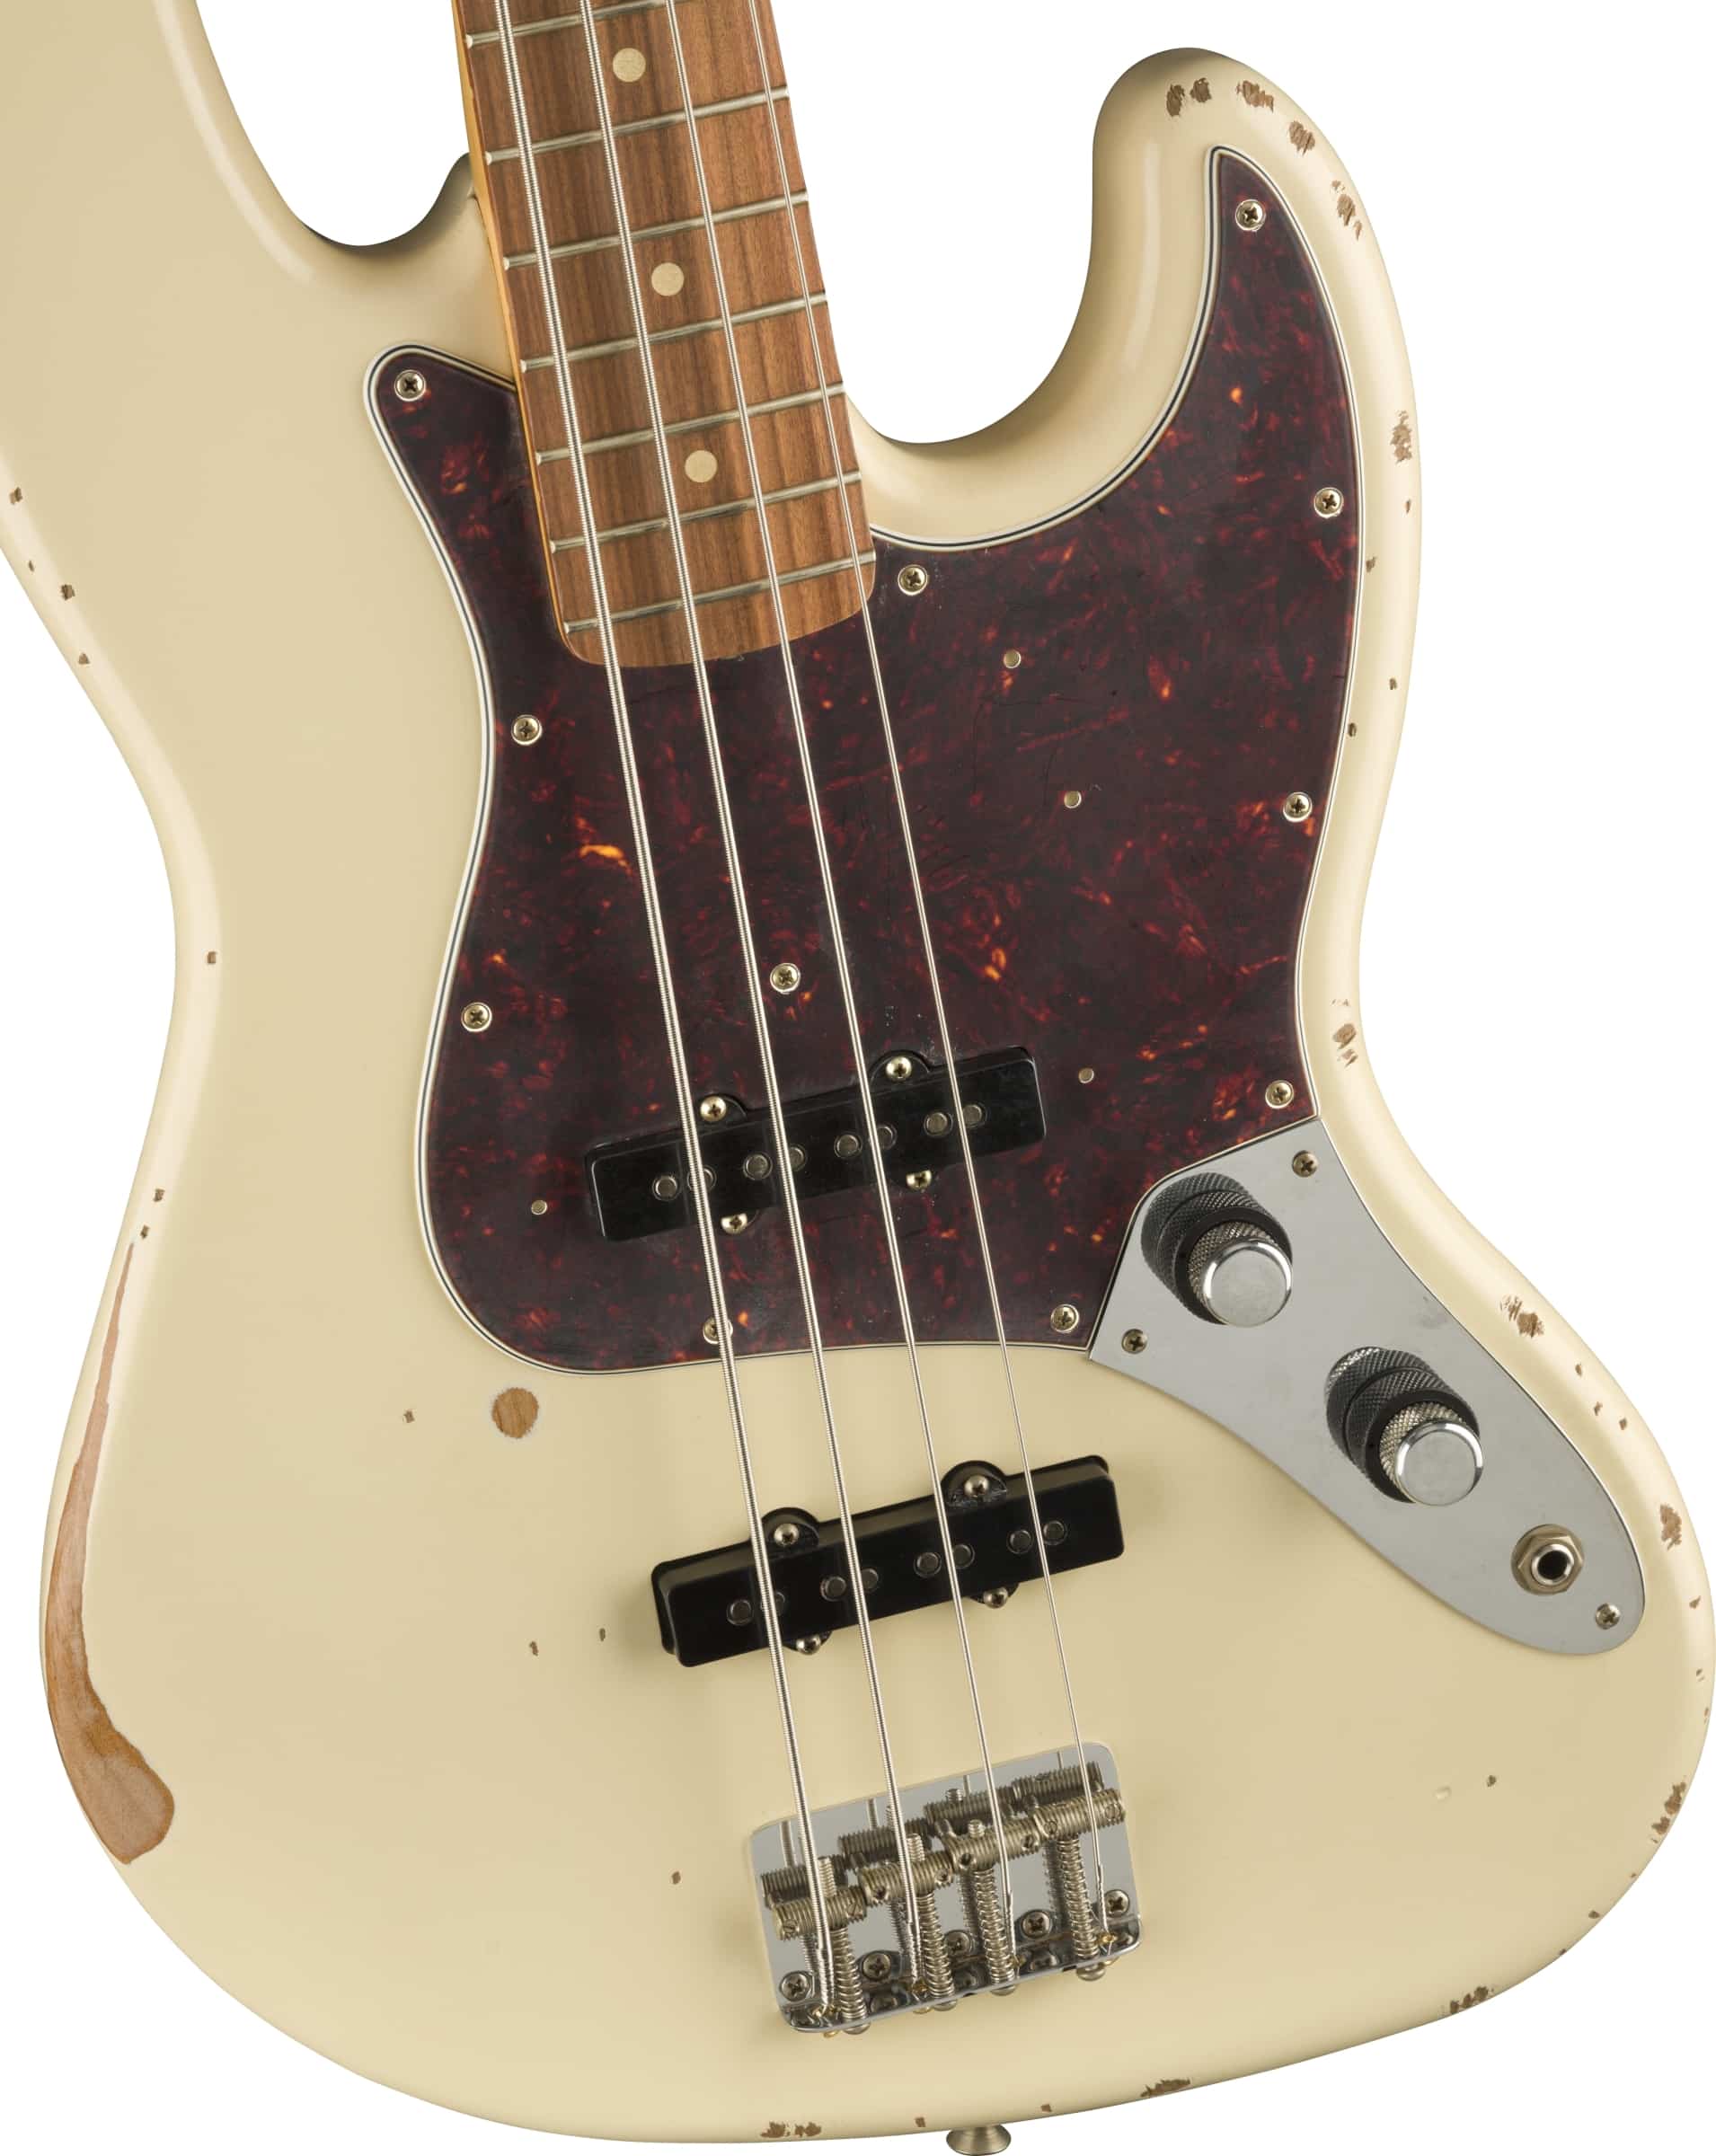 Fender Celebrates The 60th Anniversary Of The Jazz Bass® With Two New Models